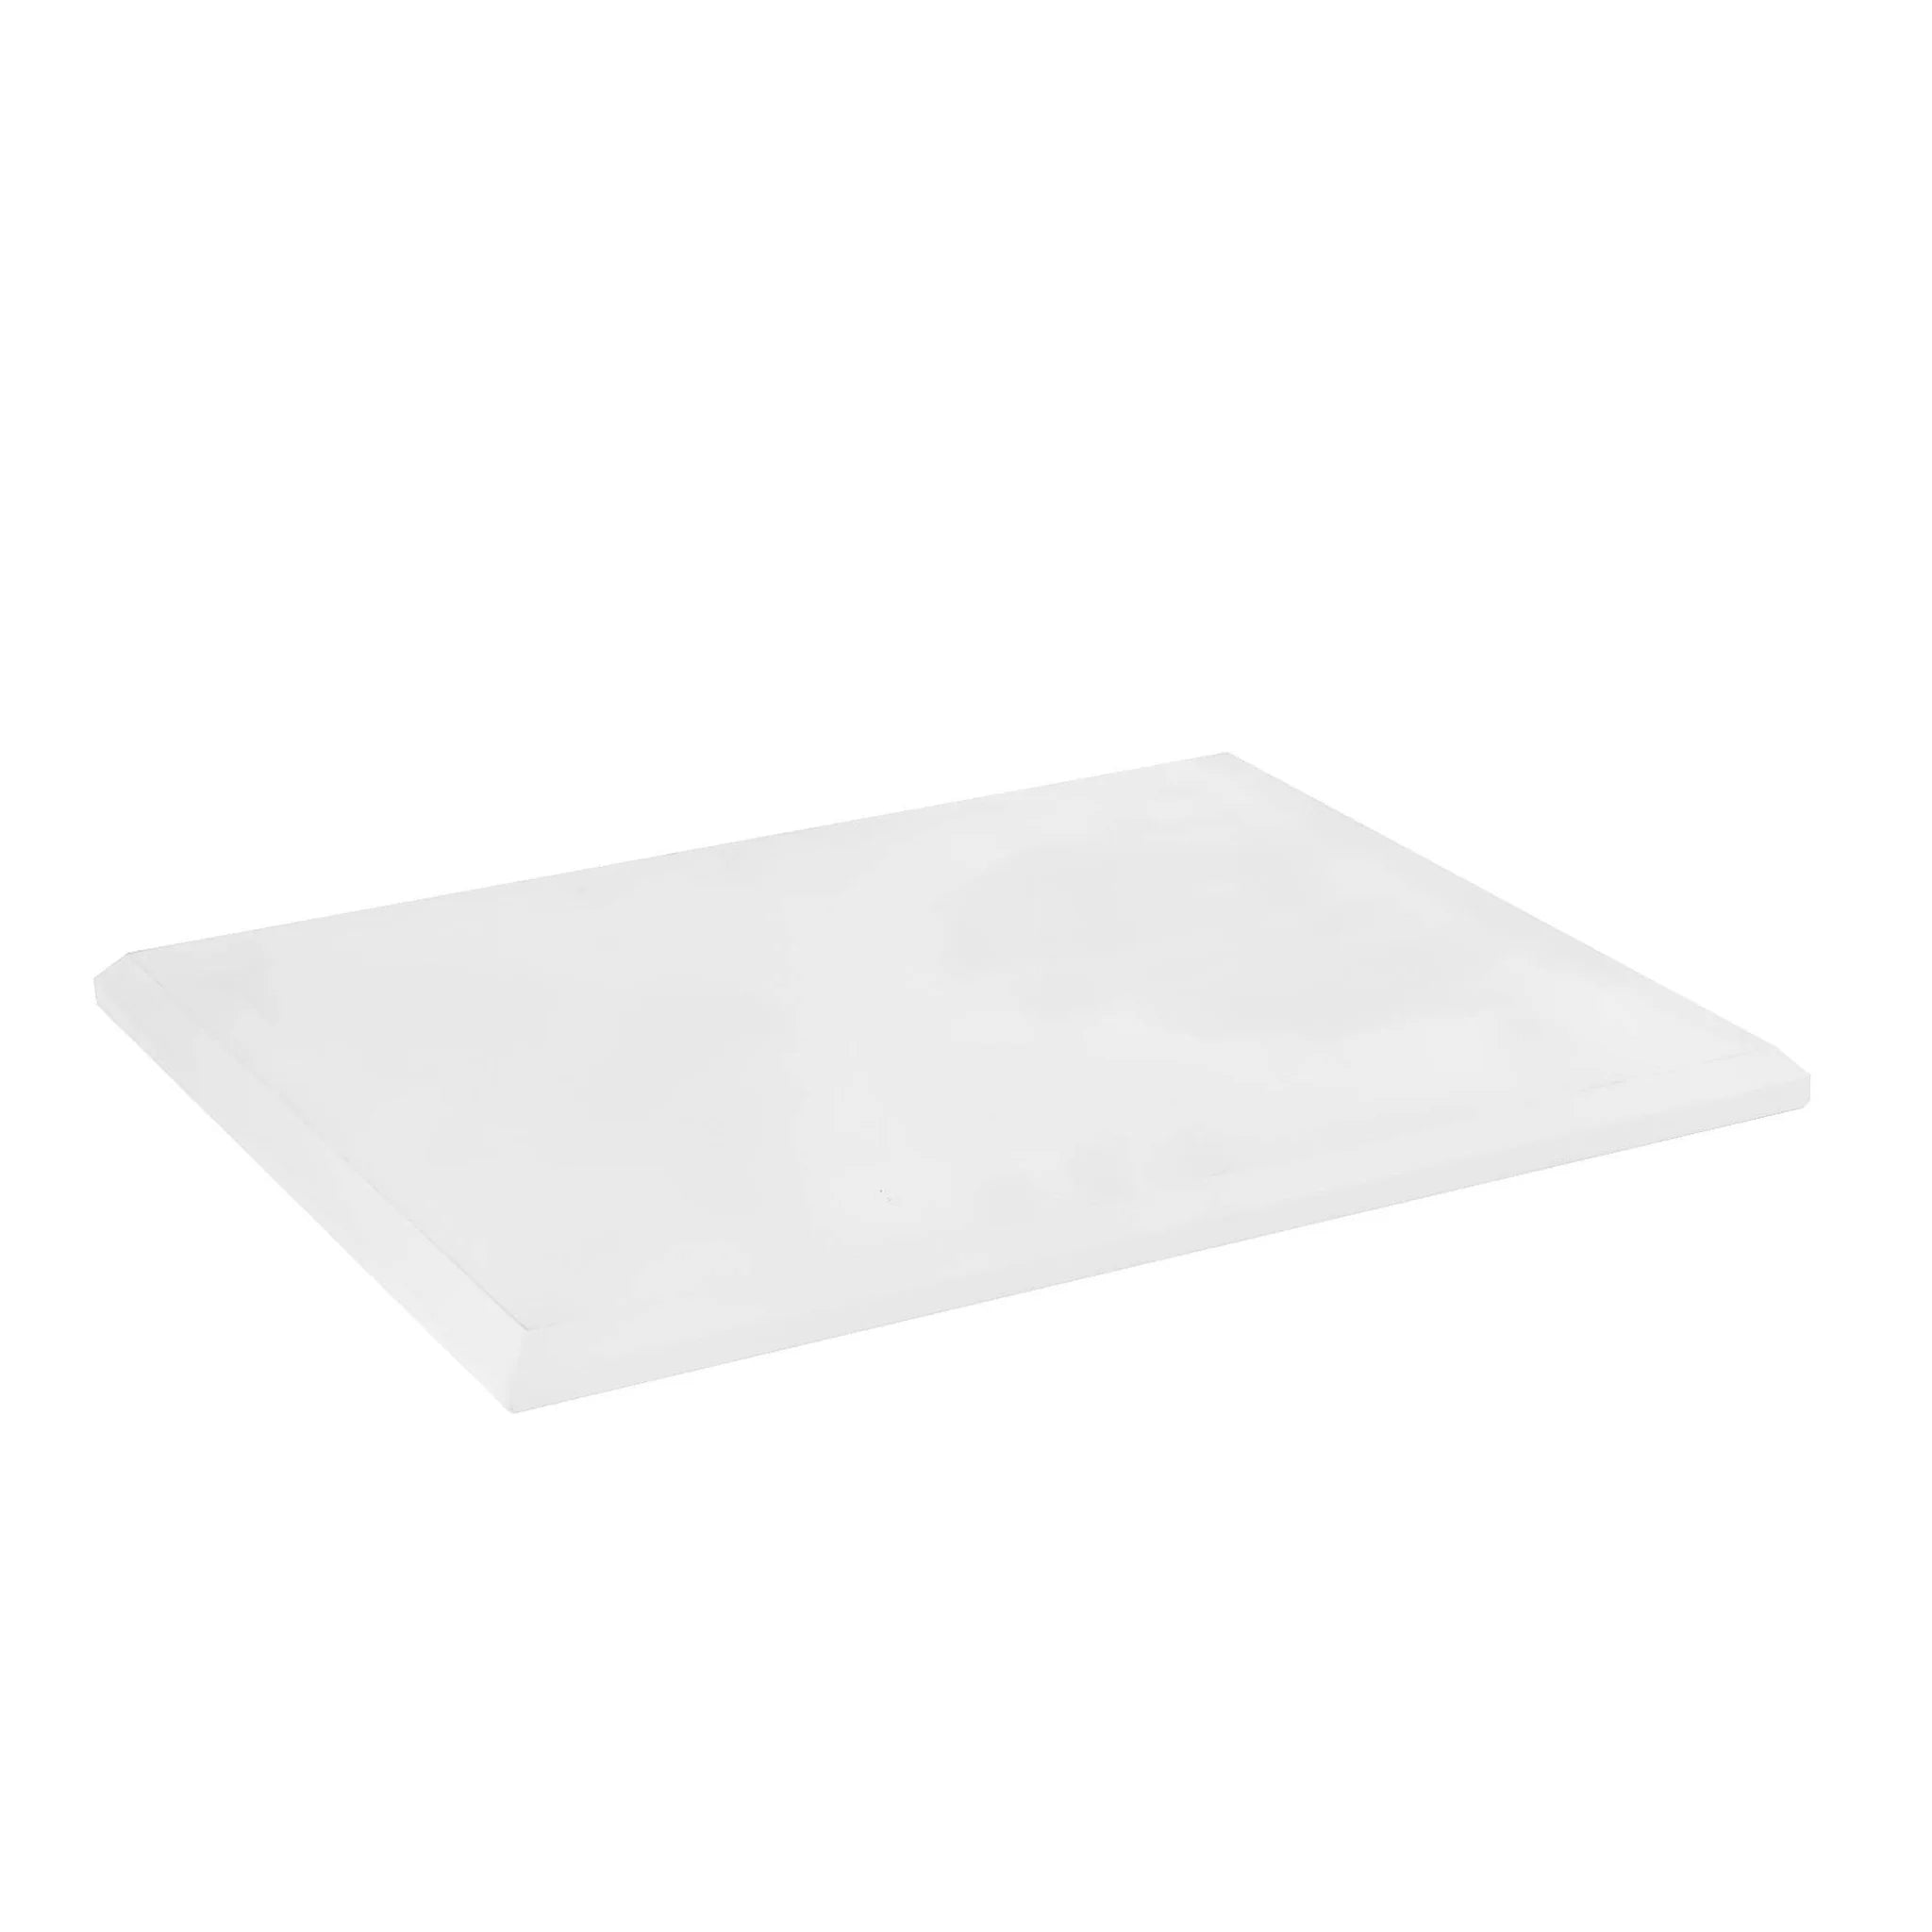 Frosted Modern Solid Crystal Tray 14x10